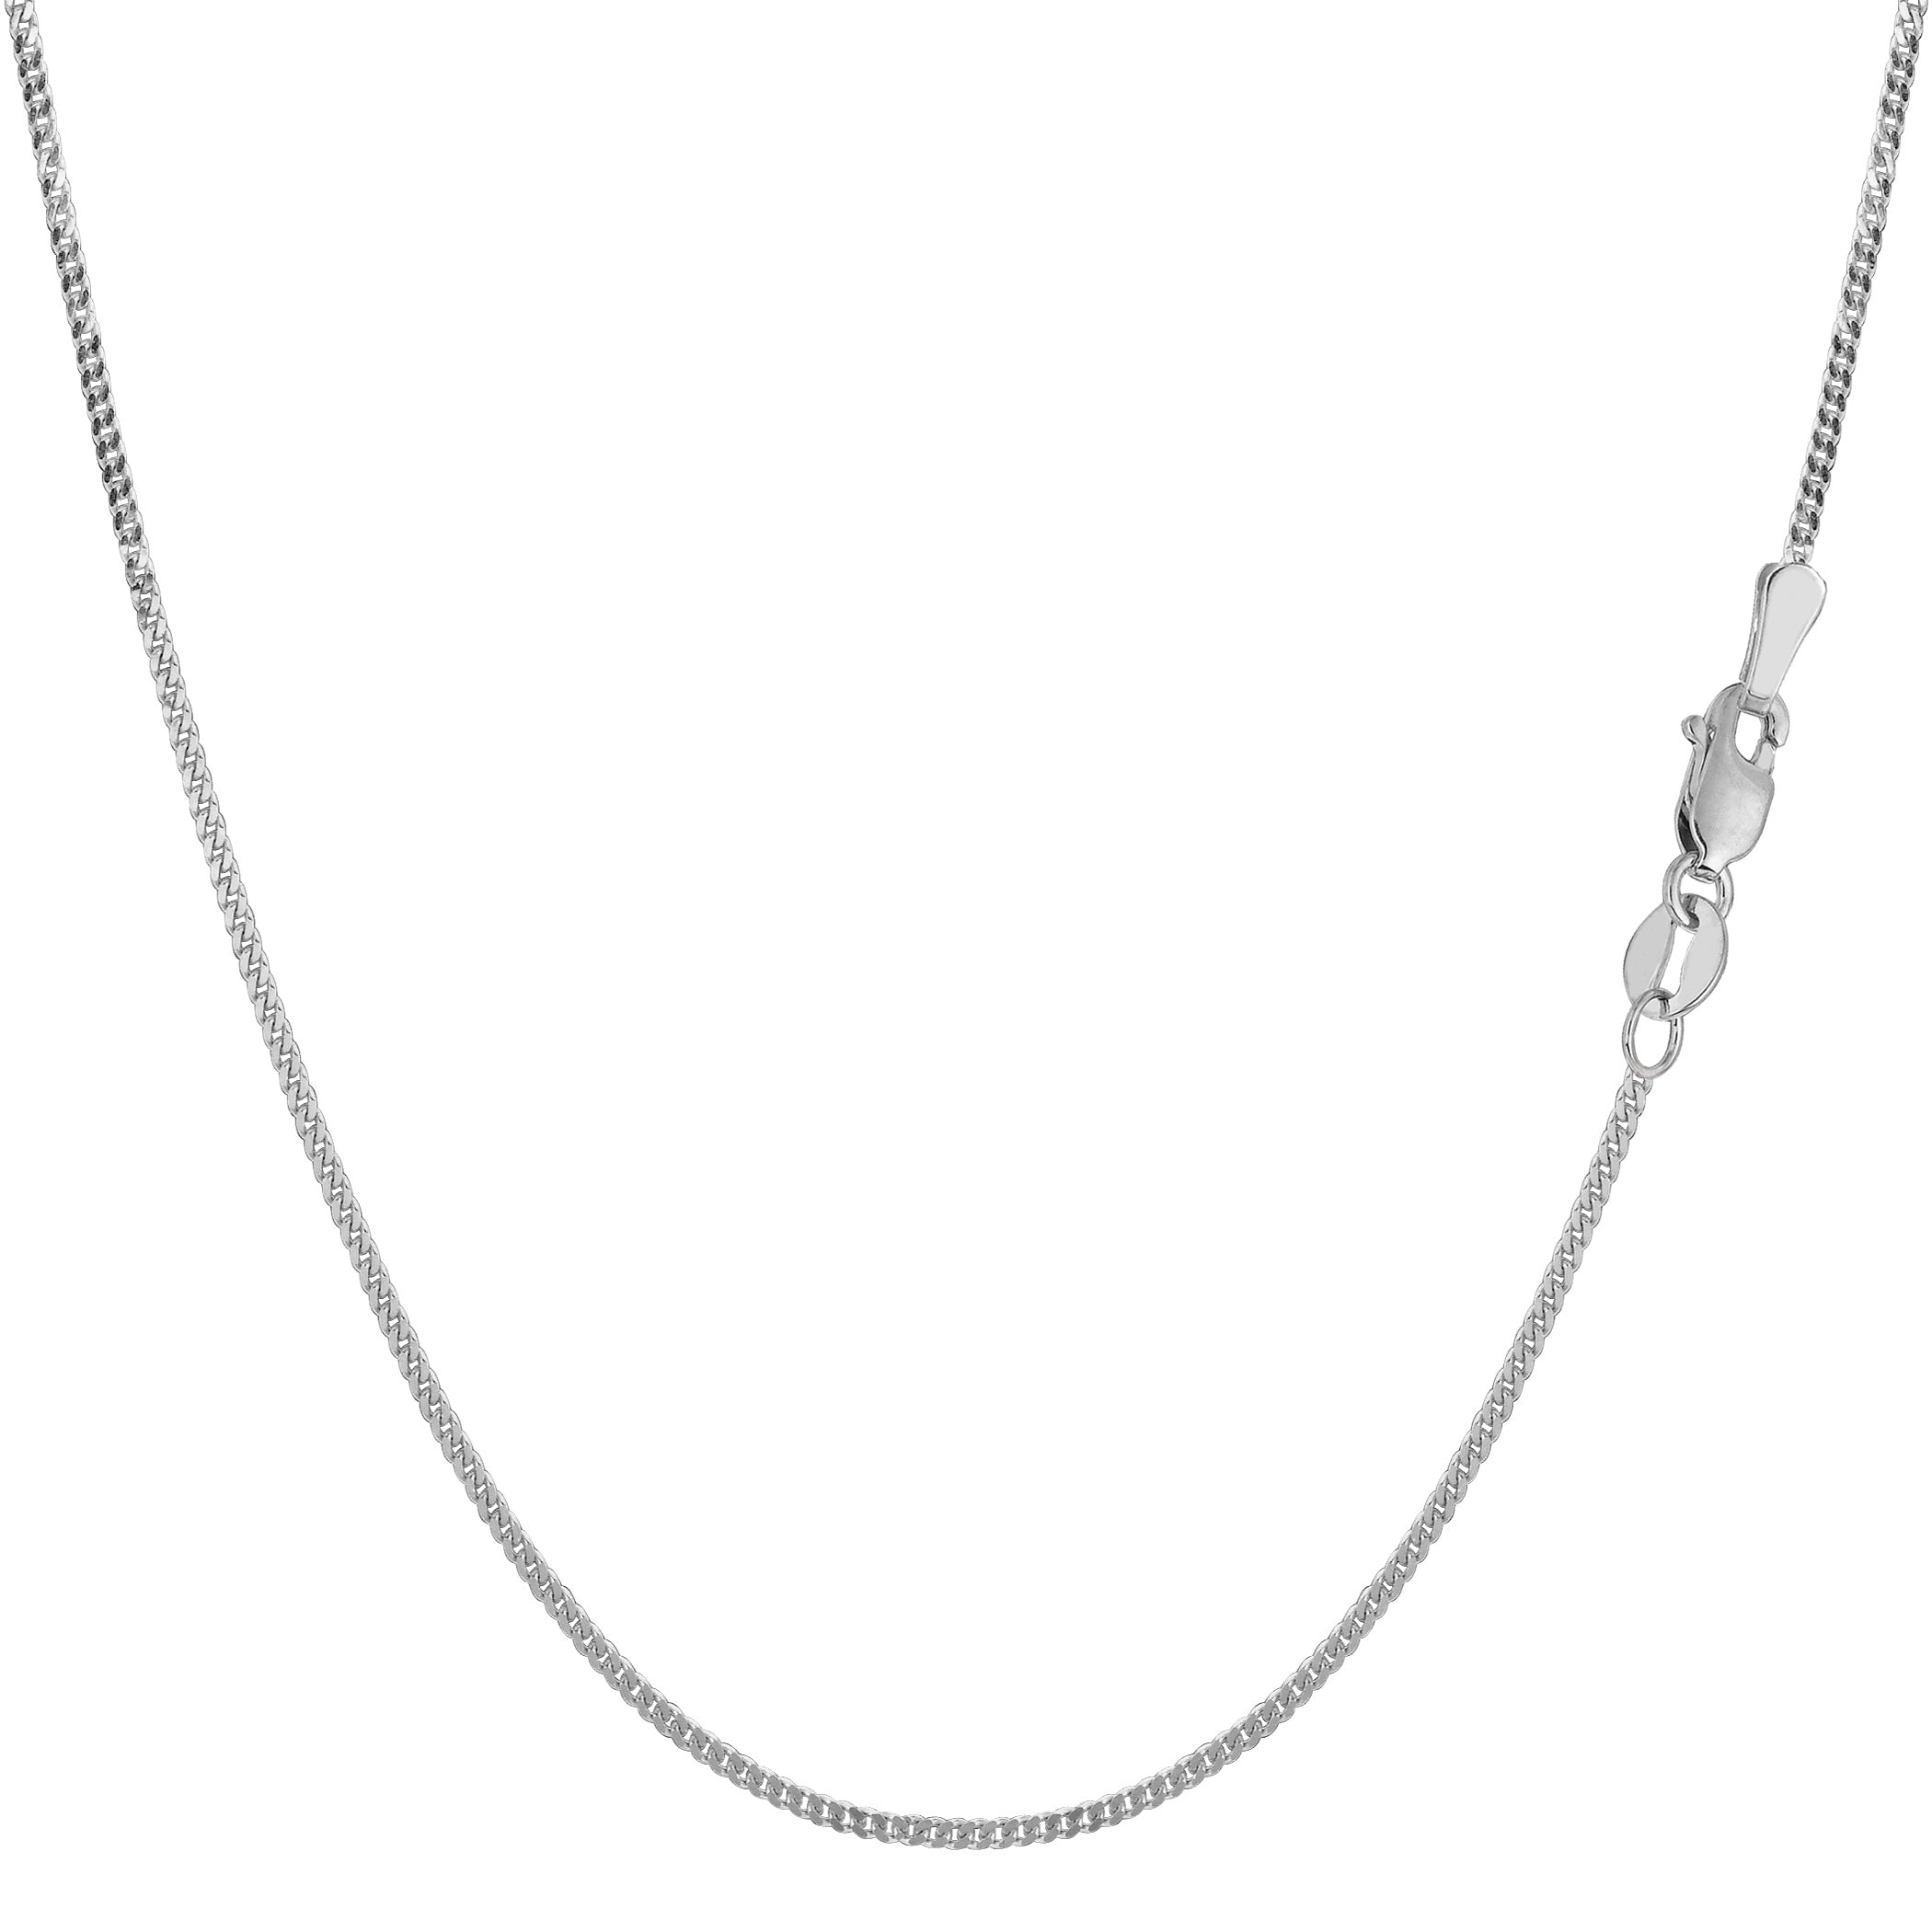 10k White Gold Gourmette Chain Necklace, 1.0mm fine designer jewelry for men and women